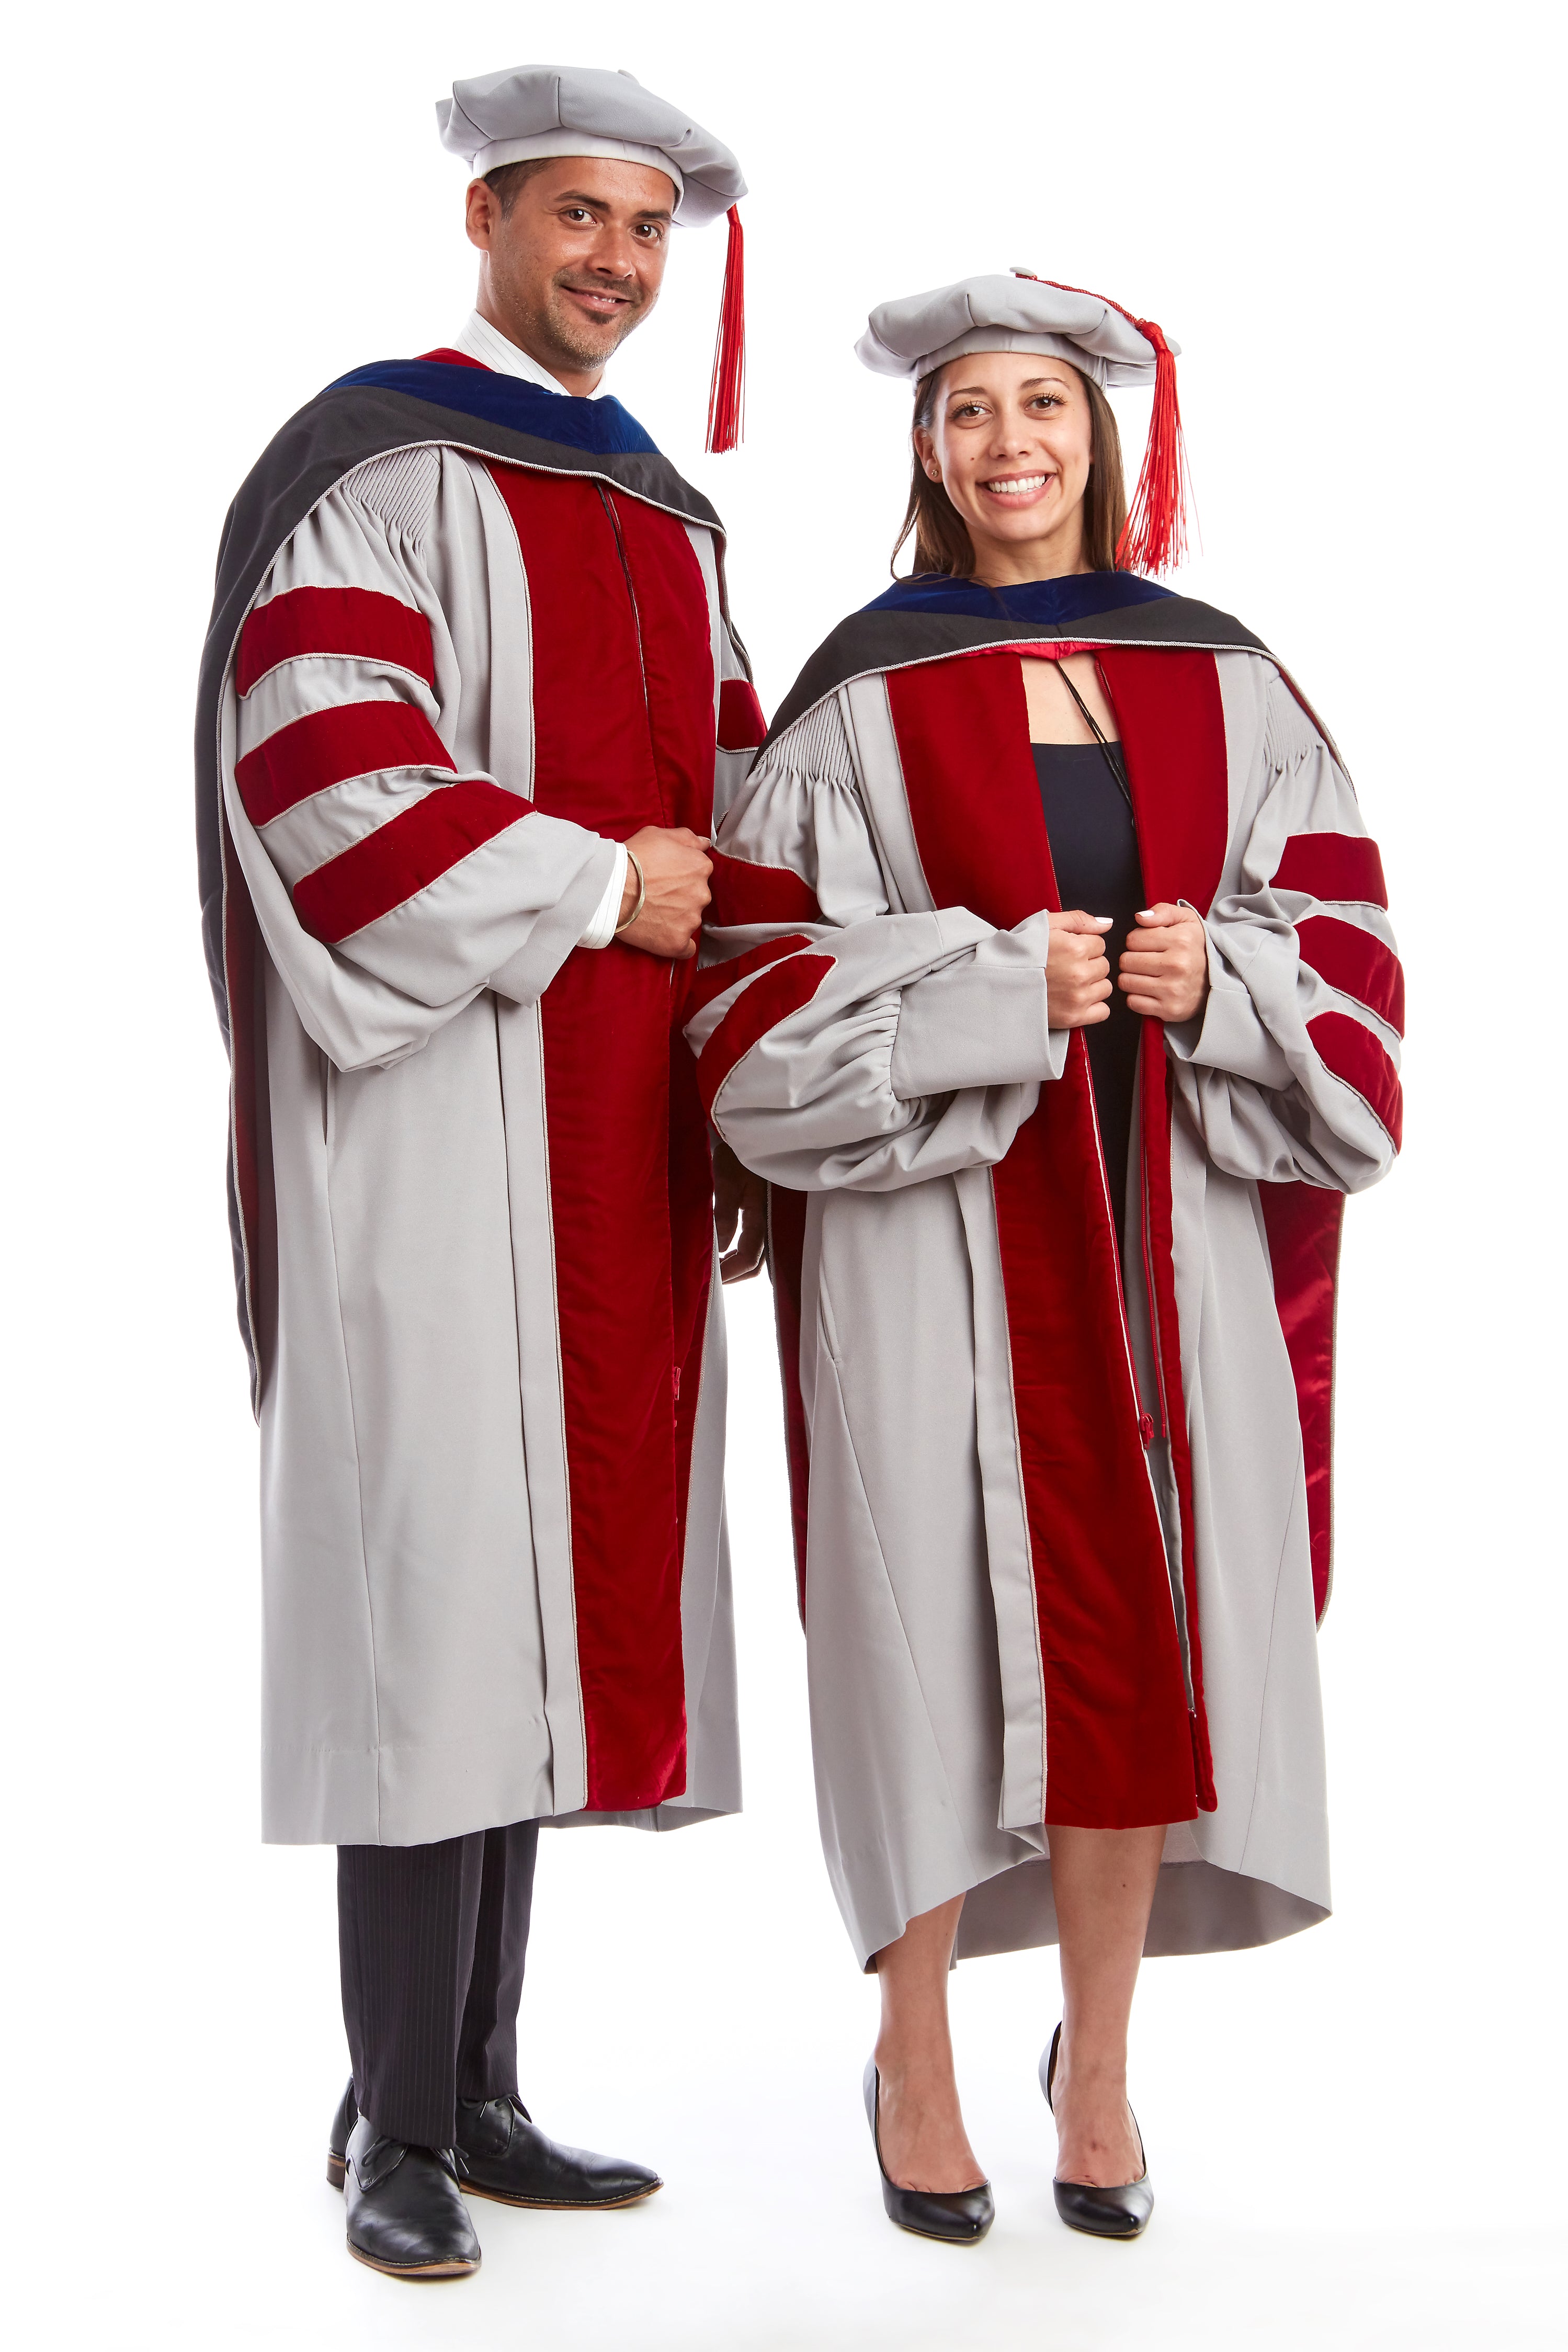 How To Wear Your Academic Hood – CAPGOWN